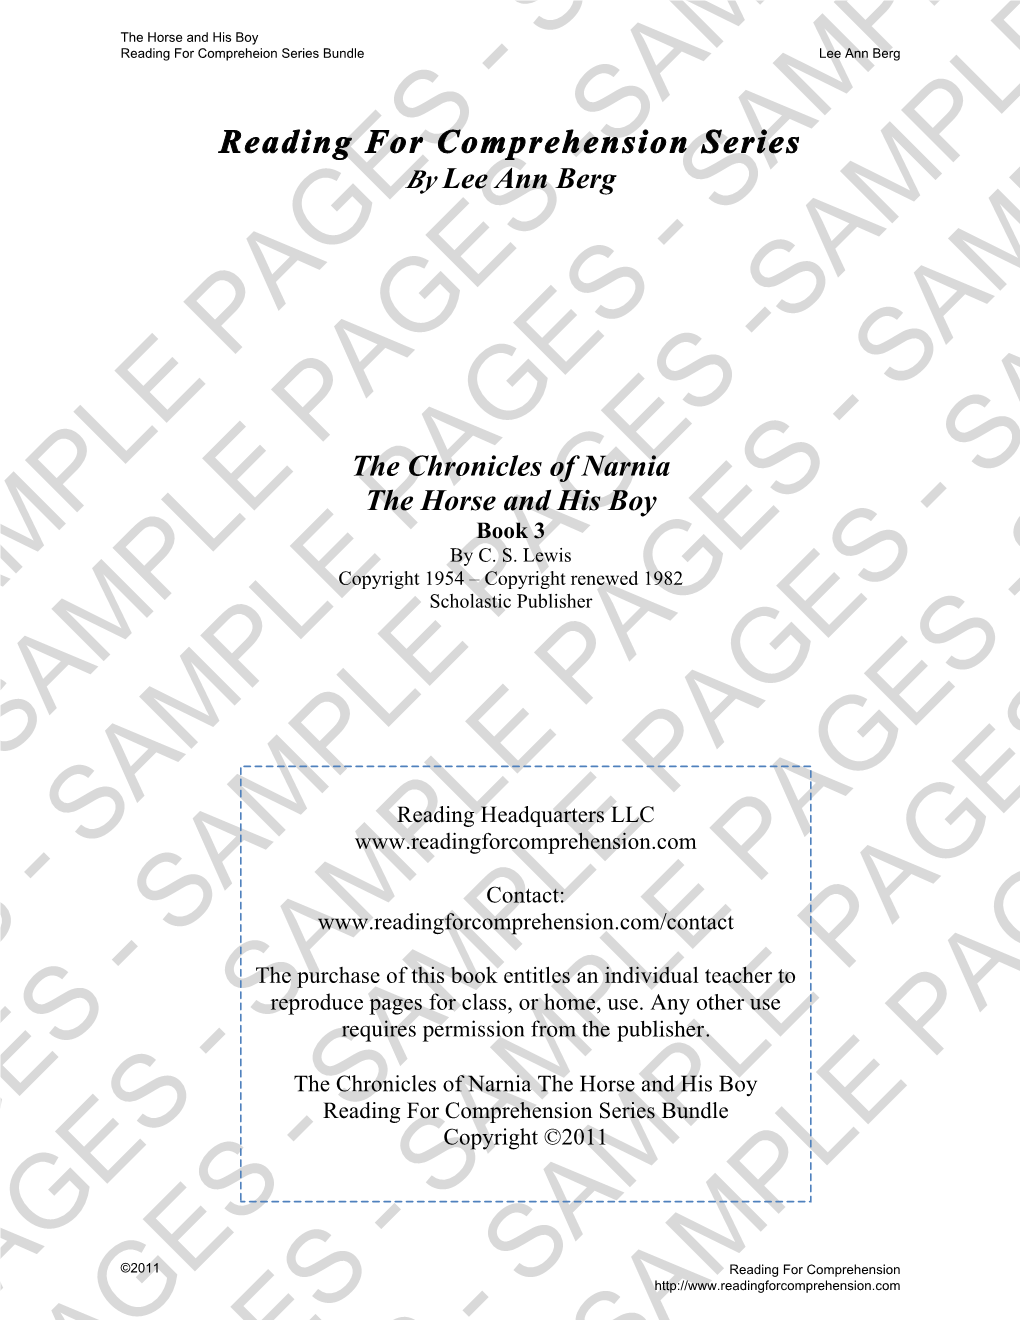 Samplelee Ann Berg - PAGES Reading for Comprehension Series by Lee Ann Berg-SAMPLE PAGES